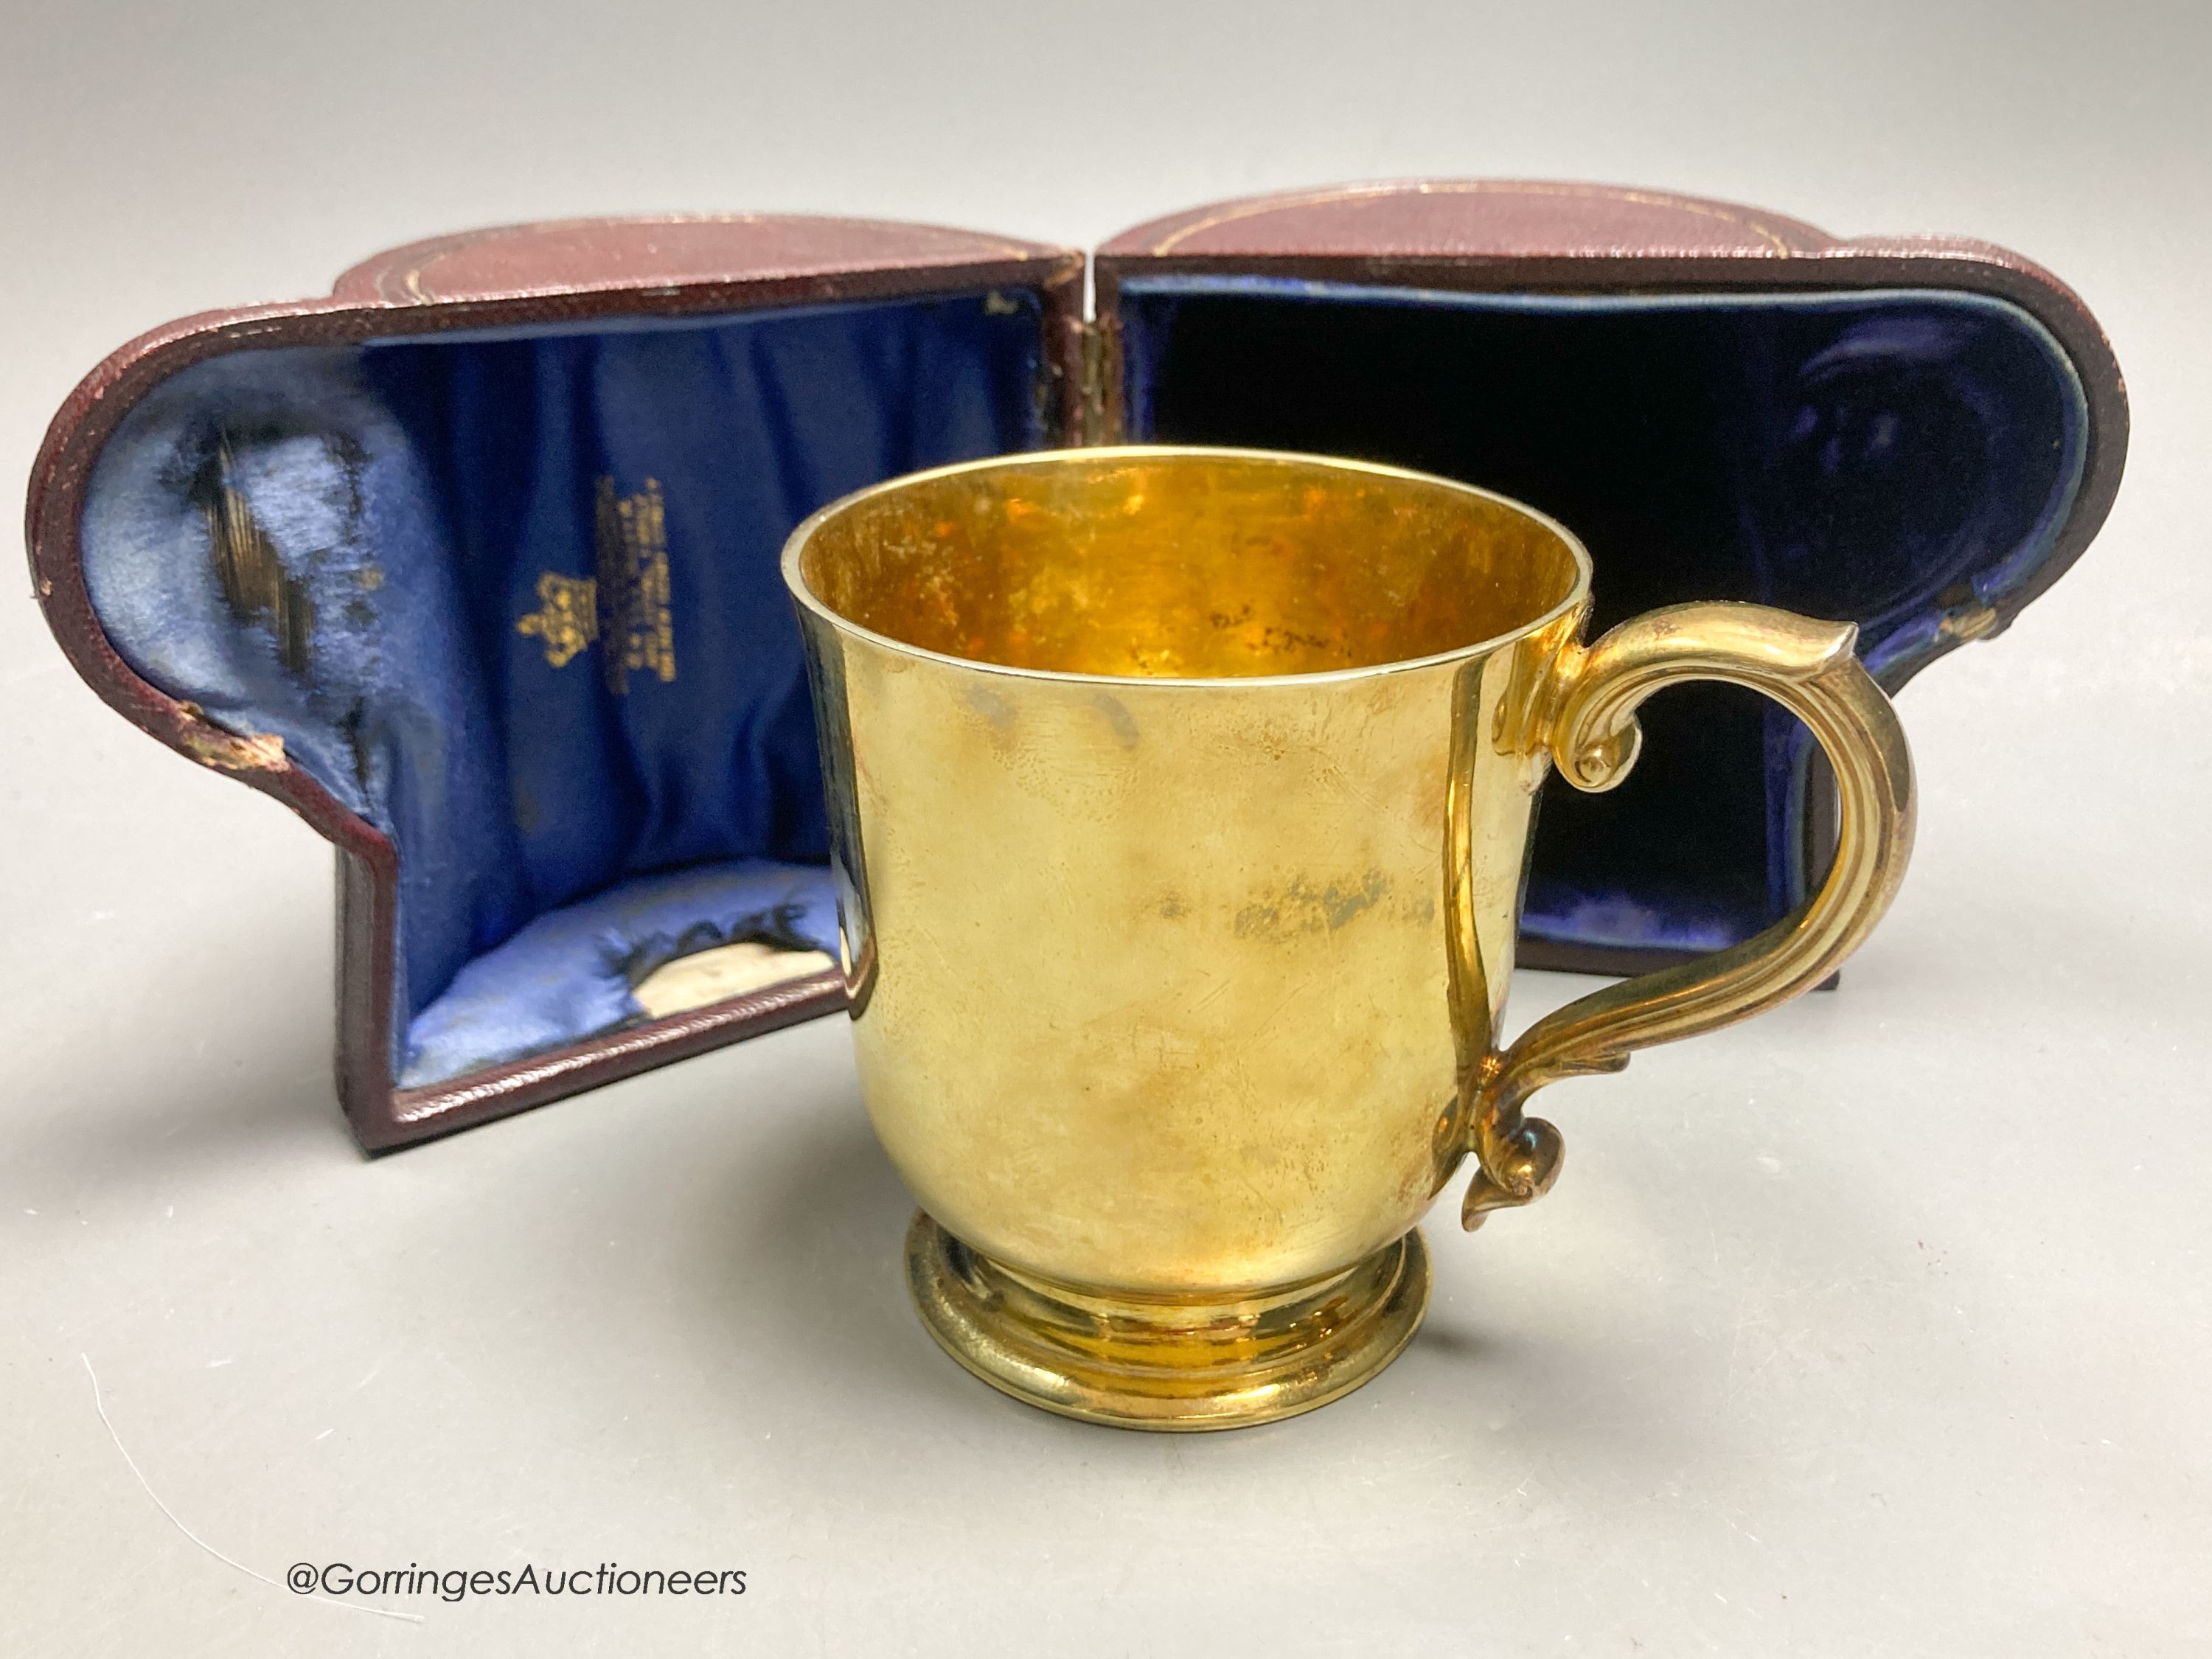 A Victorian silver gilt christening mug, by R & S. Garrard & Co, London, 1873, height 82mm, 7oz, in associated leather carrying case.